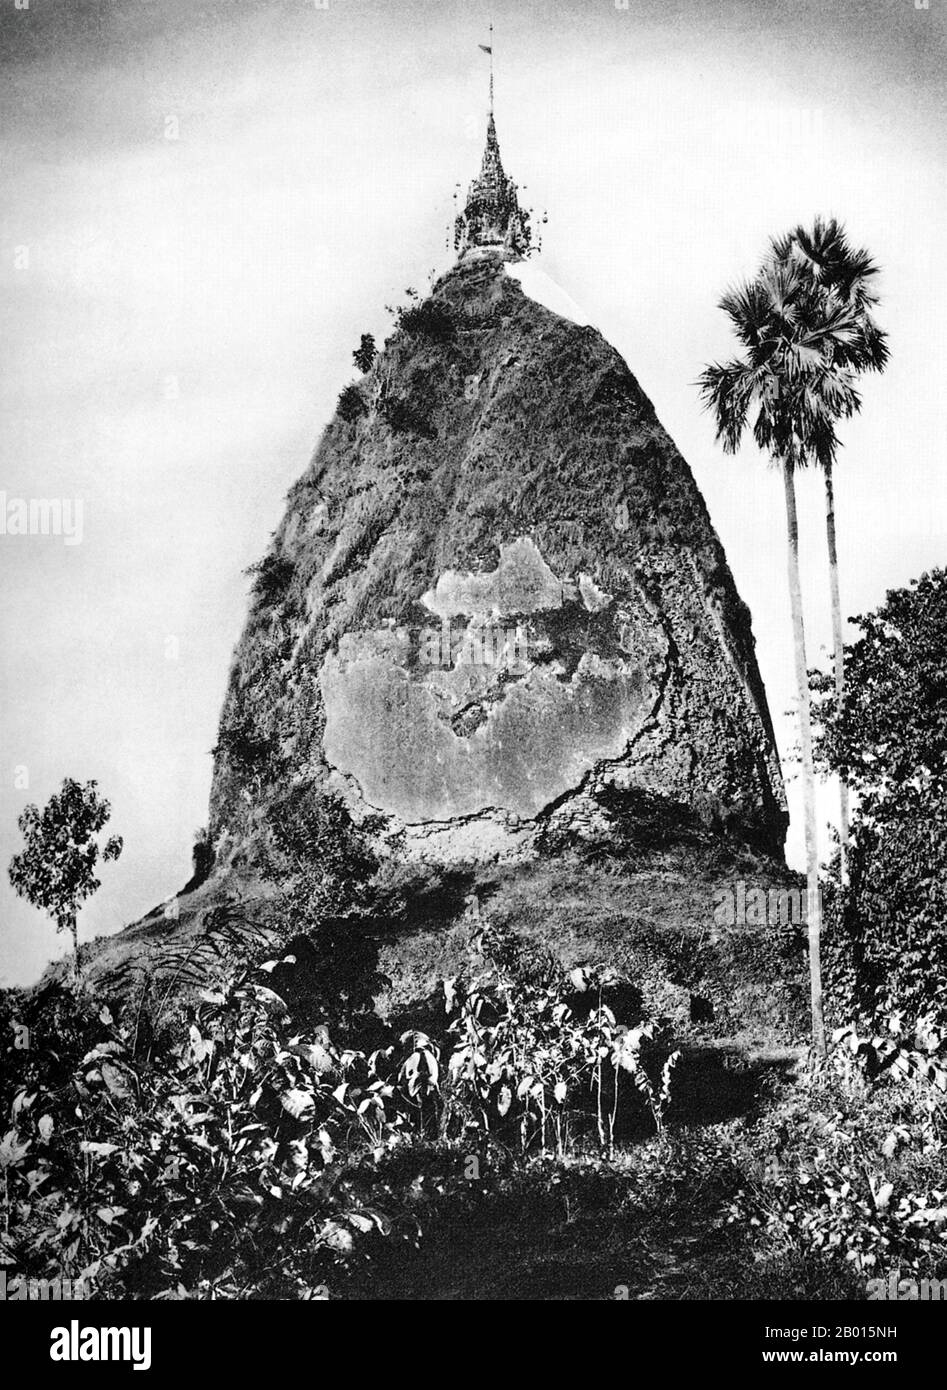 Burma/Myanmar: Papagyi Pagoda near Prome, lower Burma, c. 1920s.  Legend attributes the first Buddhist doctrine in Burma to 228 BCE when Sohn Uttar Sthavira, one of the royal monks to Emperor Ashoka the Great of India, came to the country with other monks and sacred texts. However, the era of Buddhism truly began in the 11th century after King Anawrahta of Pagan (Bagan) was converted to Theravada Buddhism. Today, 89% of the population of Burma is Theravada Buddhist.  The ancient city of Prome, renamed Pyay, is a town in Pegu (Bago) Division in lower Burma, located on the Irrawaddy (Ayeyarwady) Stock Photo